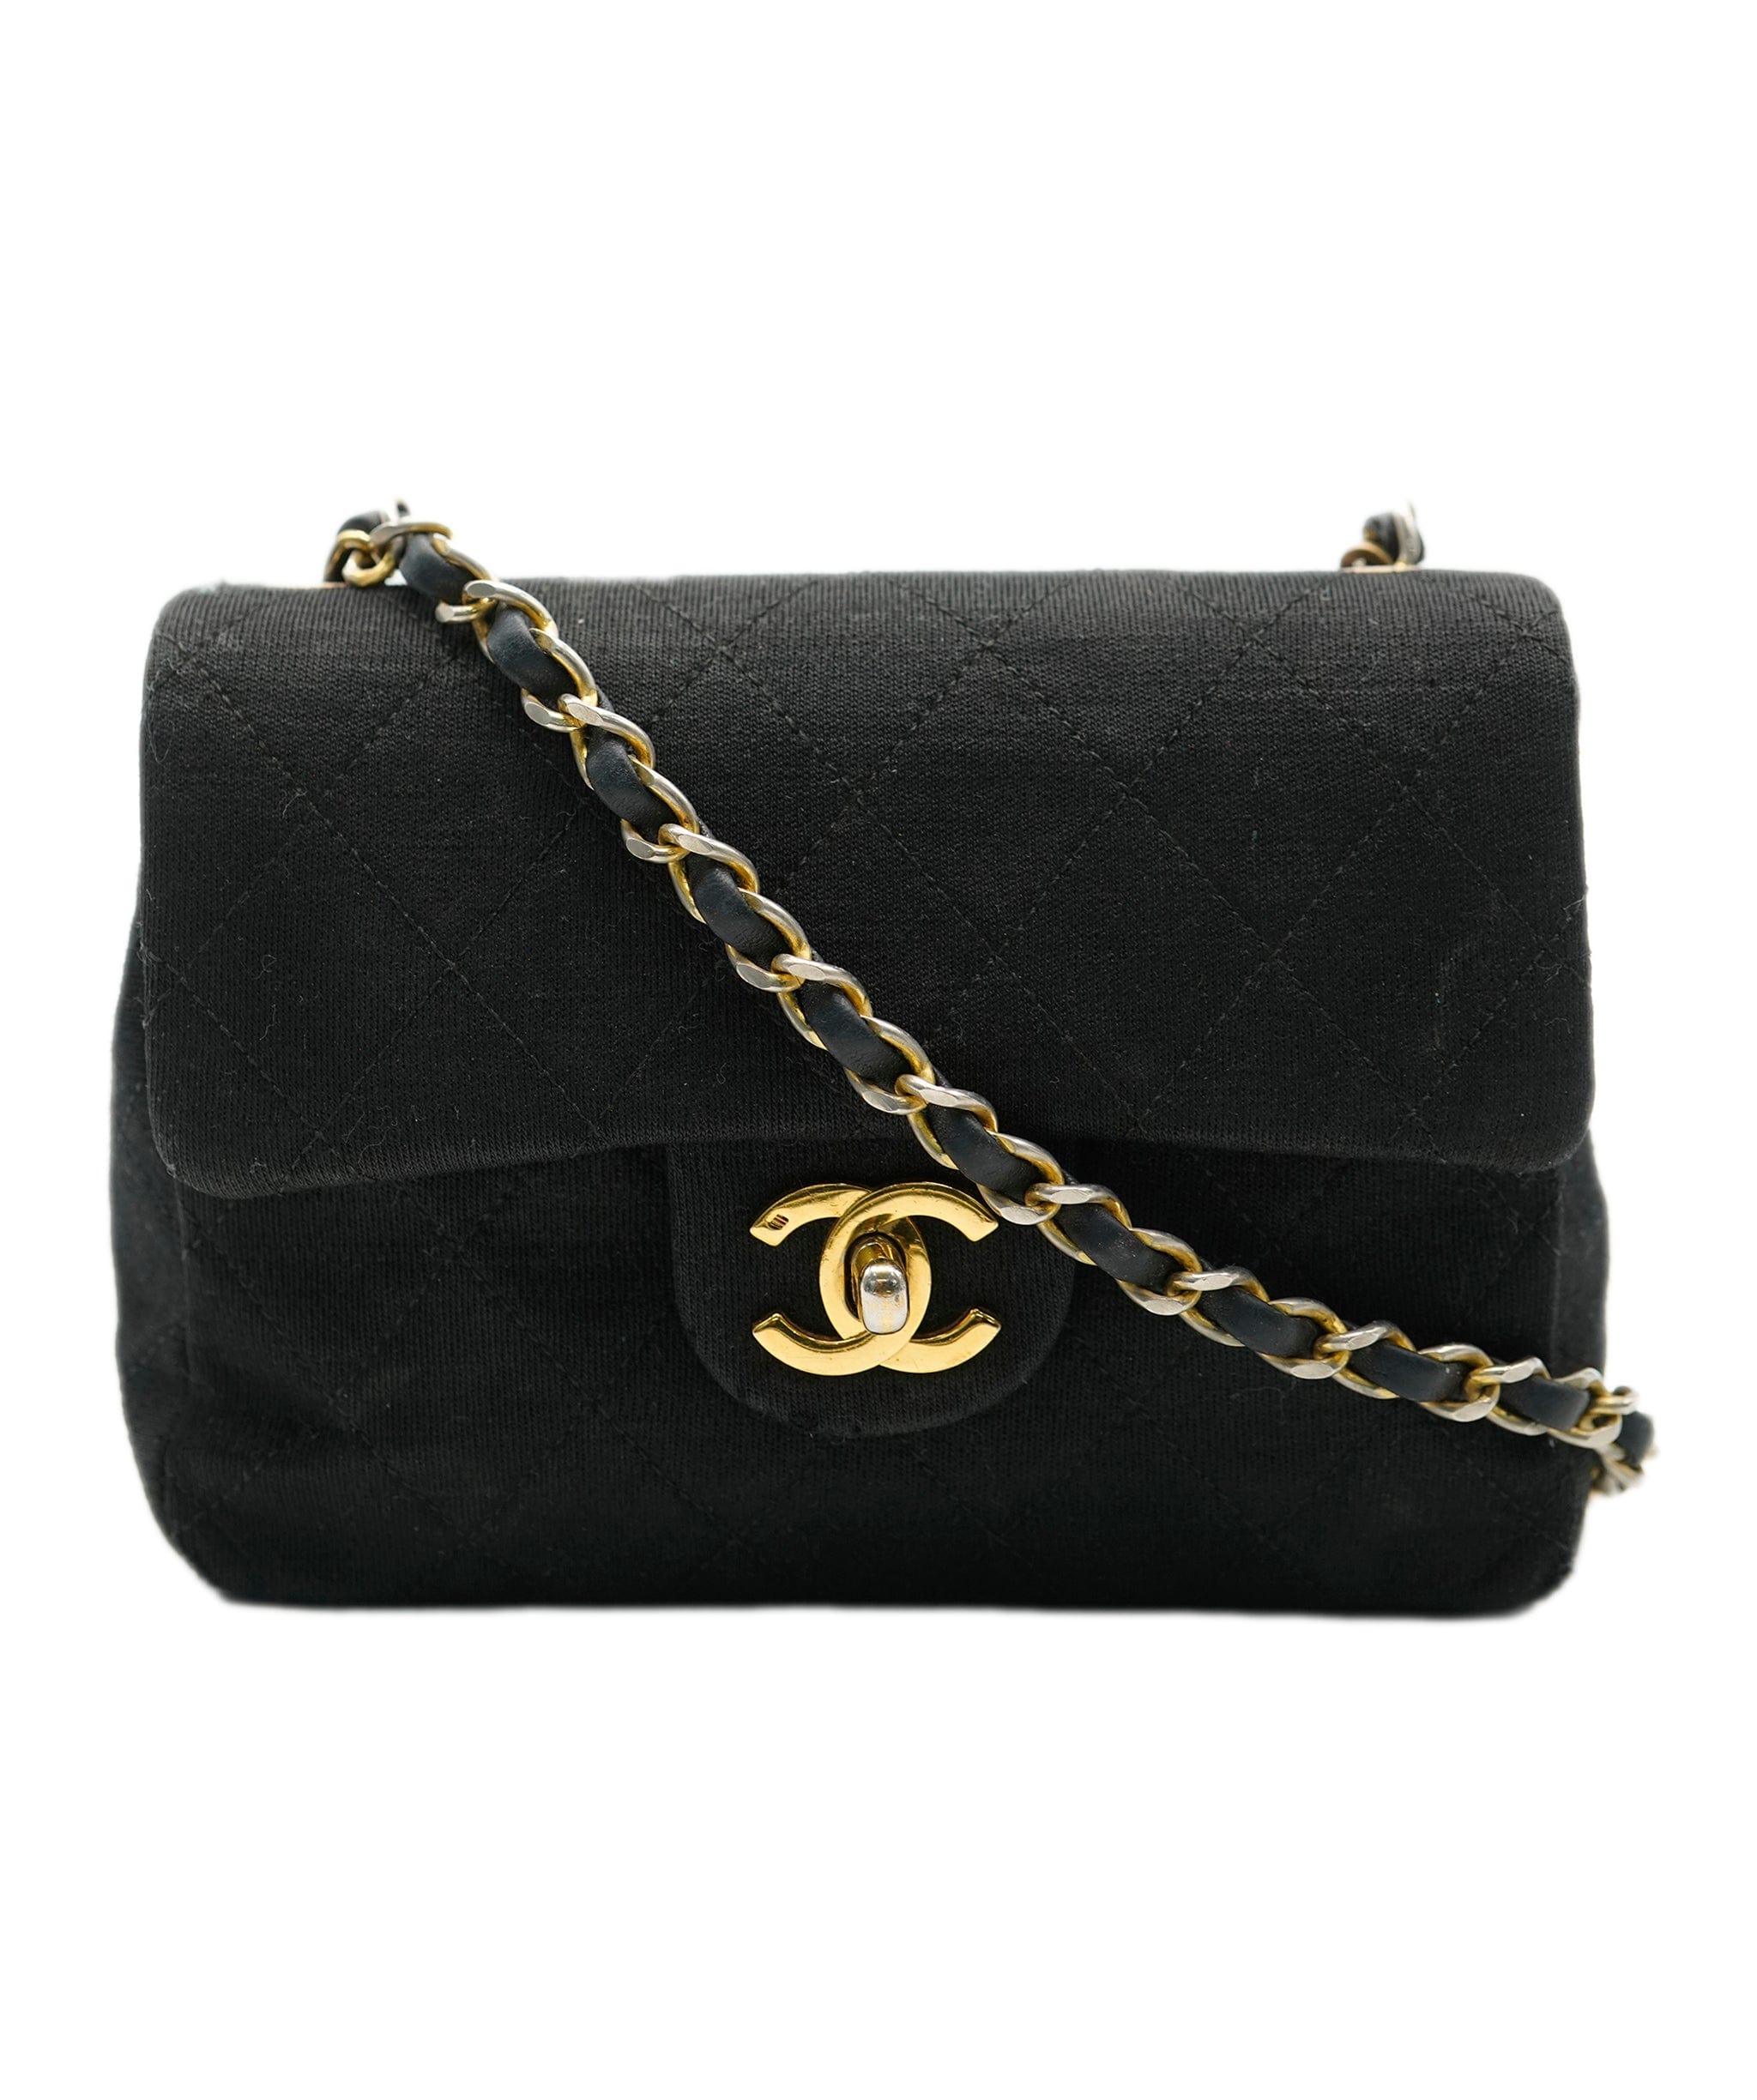 Chanel Sac Chanel Timeless Mini Jersey ghw ALC1201